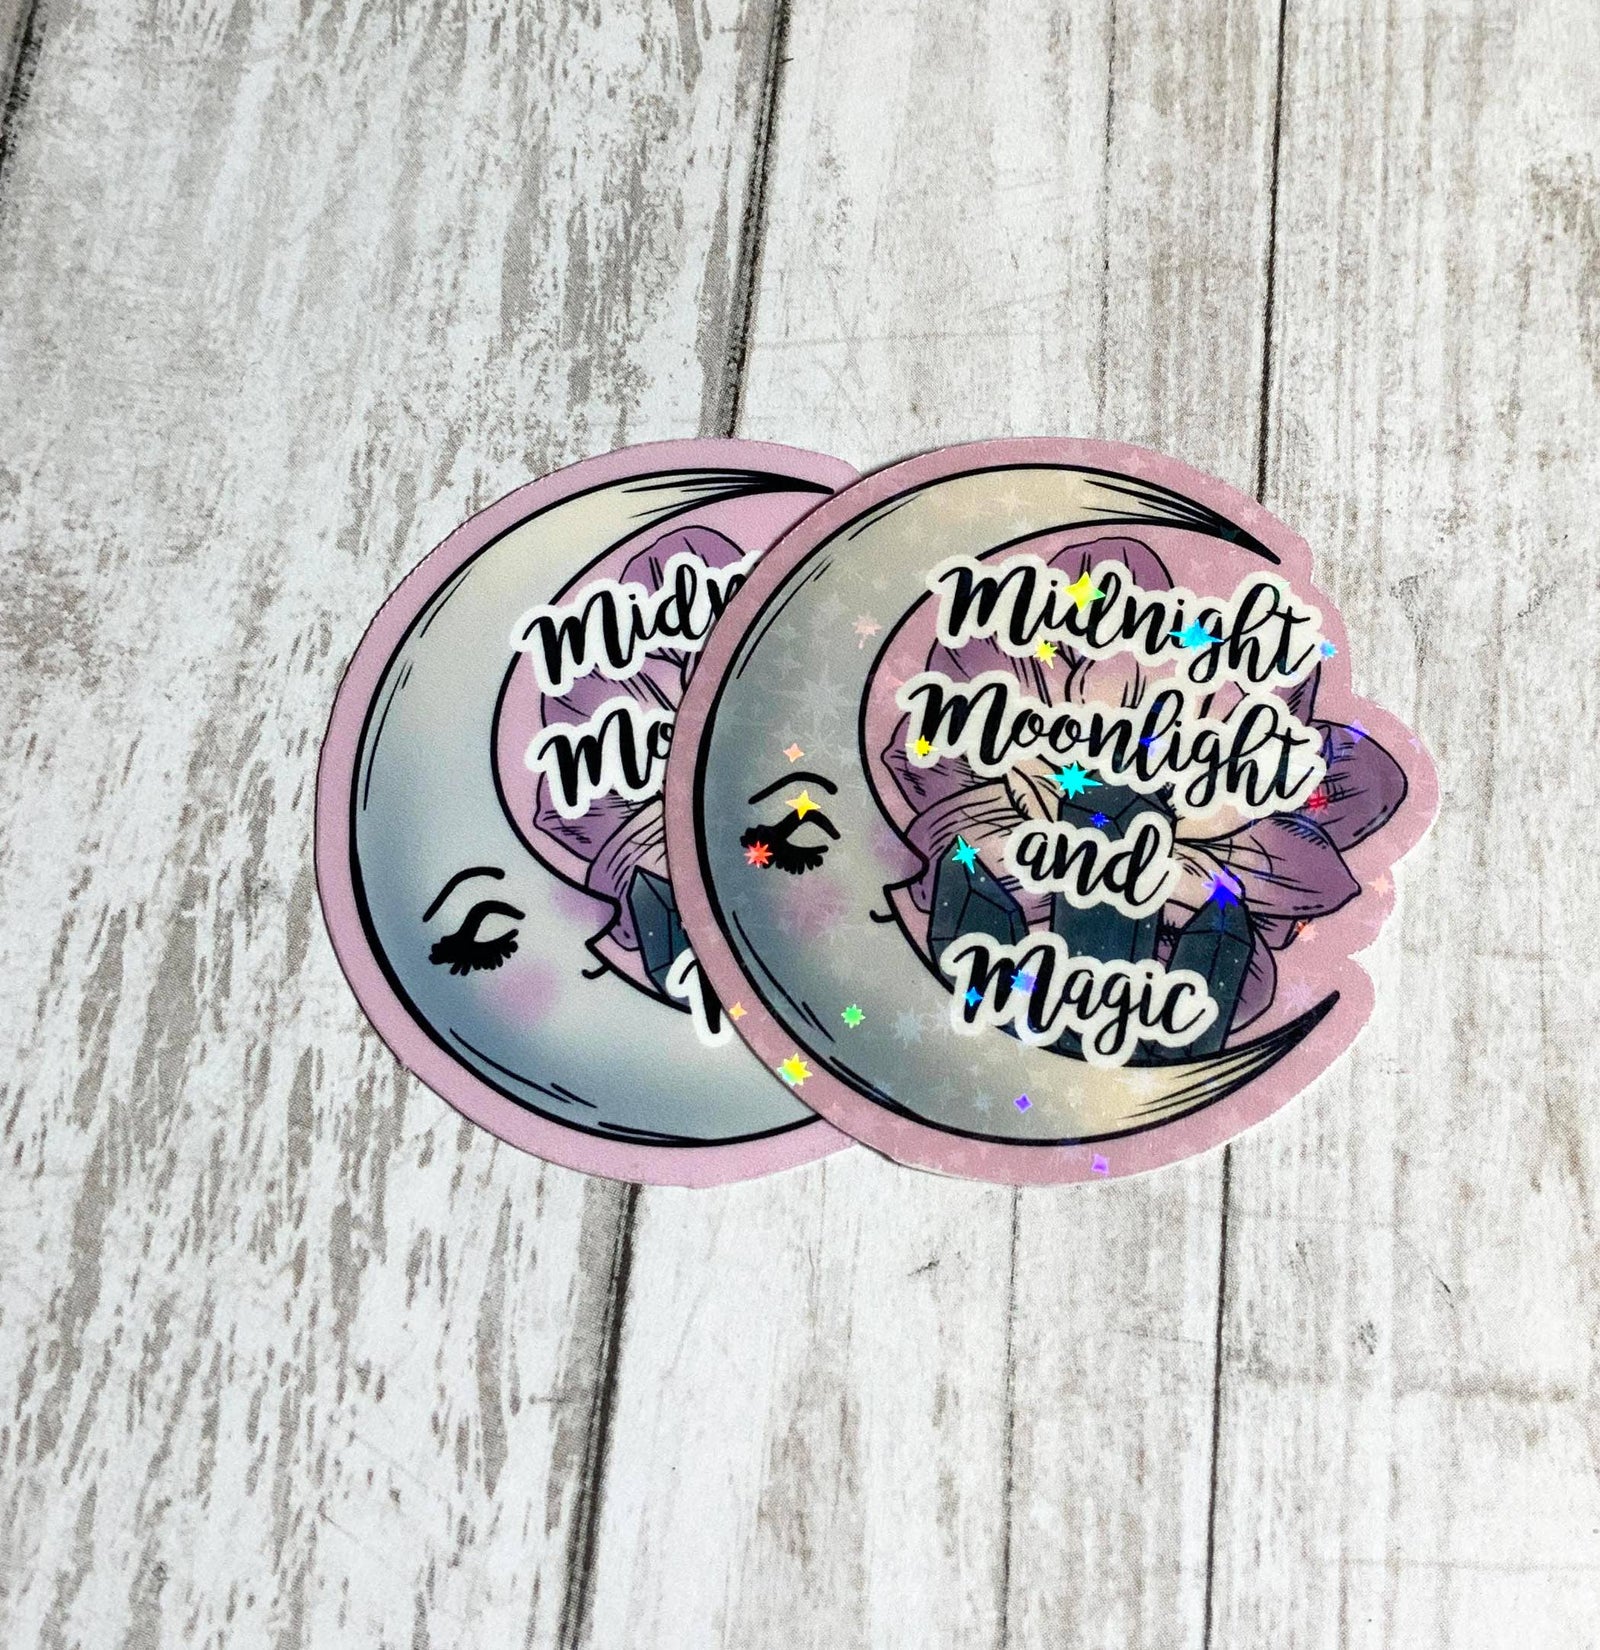 Midnight Moonlight and Magic Witchy Vinyl Sticker